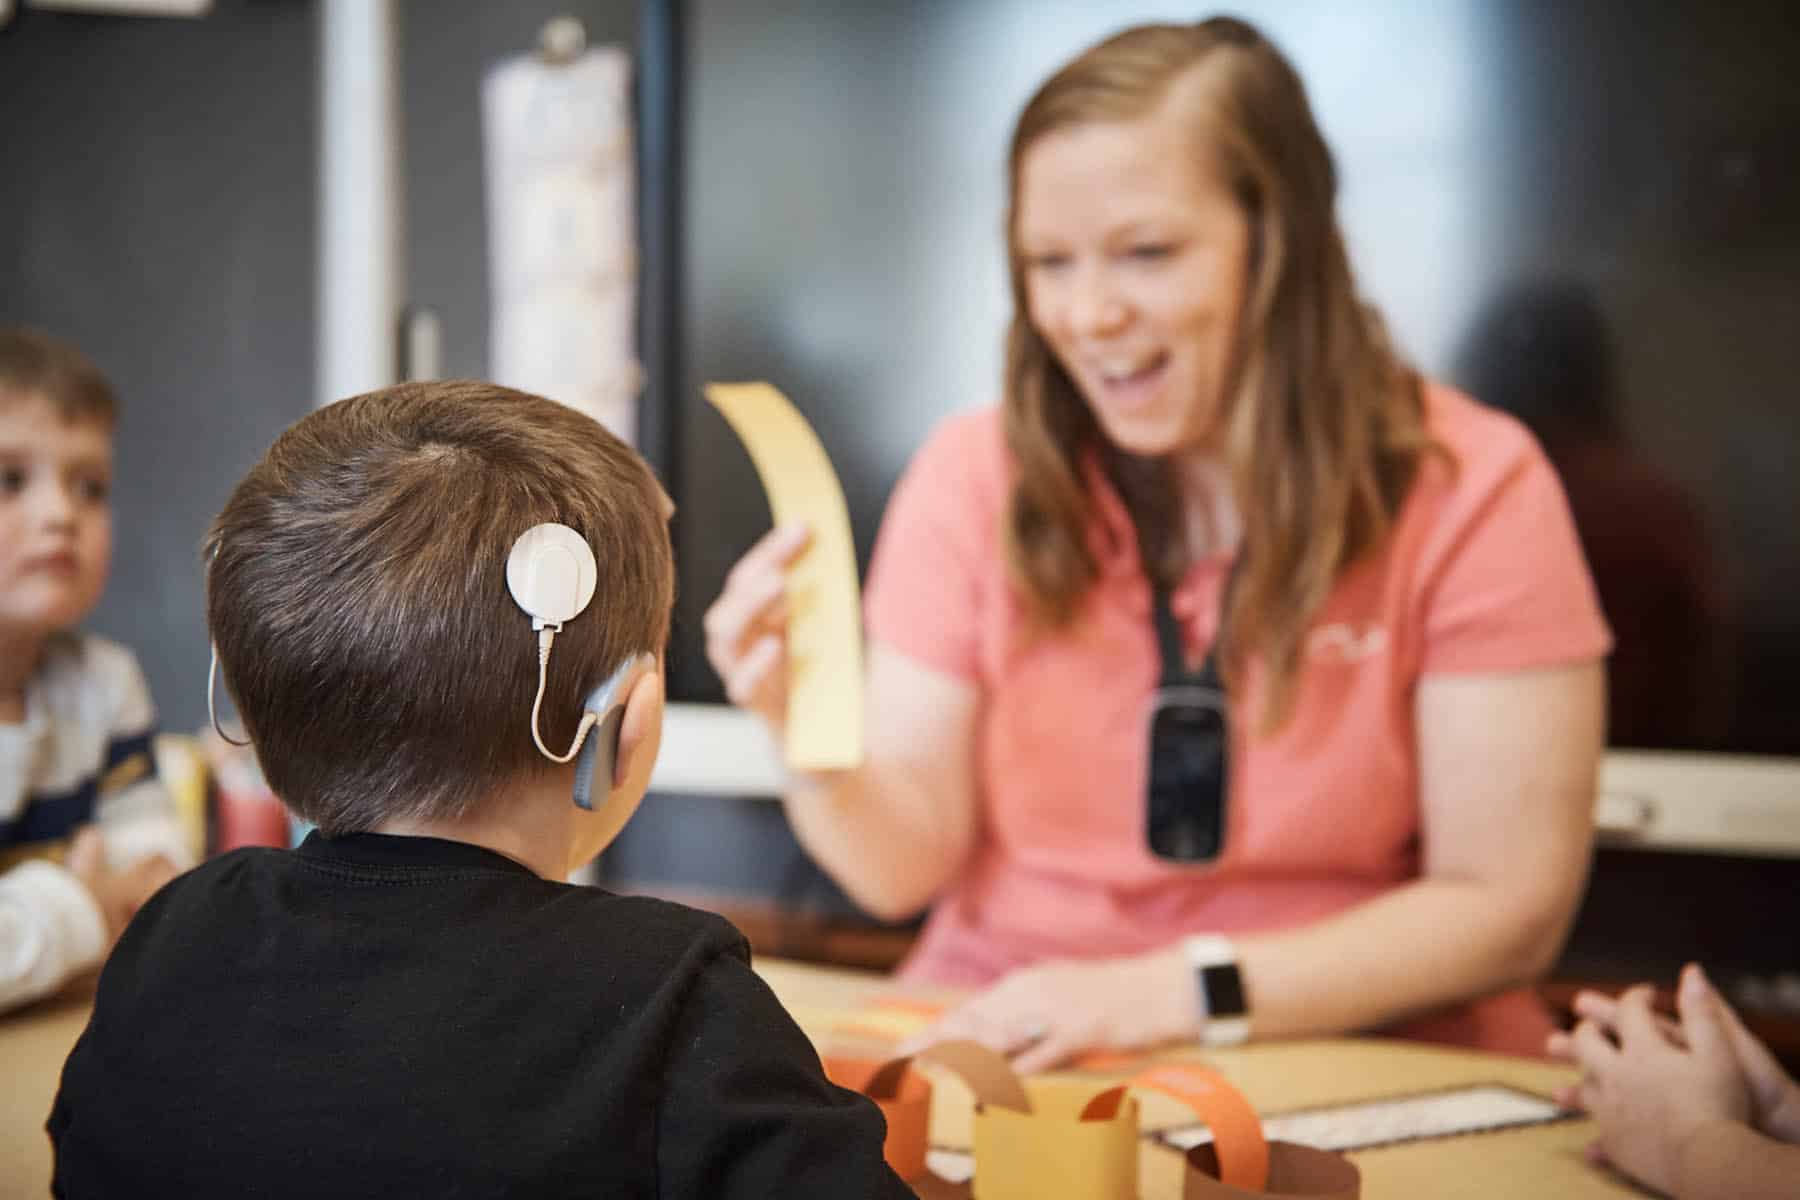 Using hearing assistive technology for students